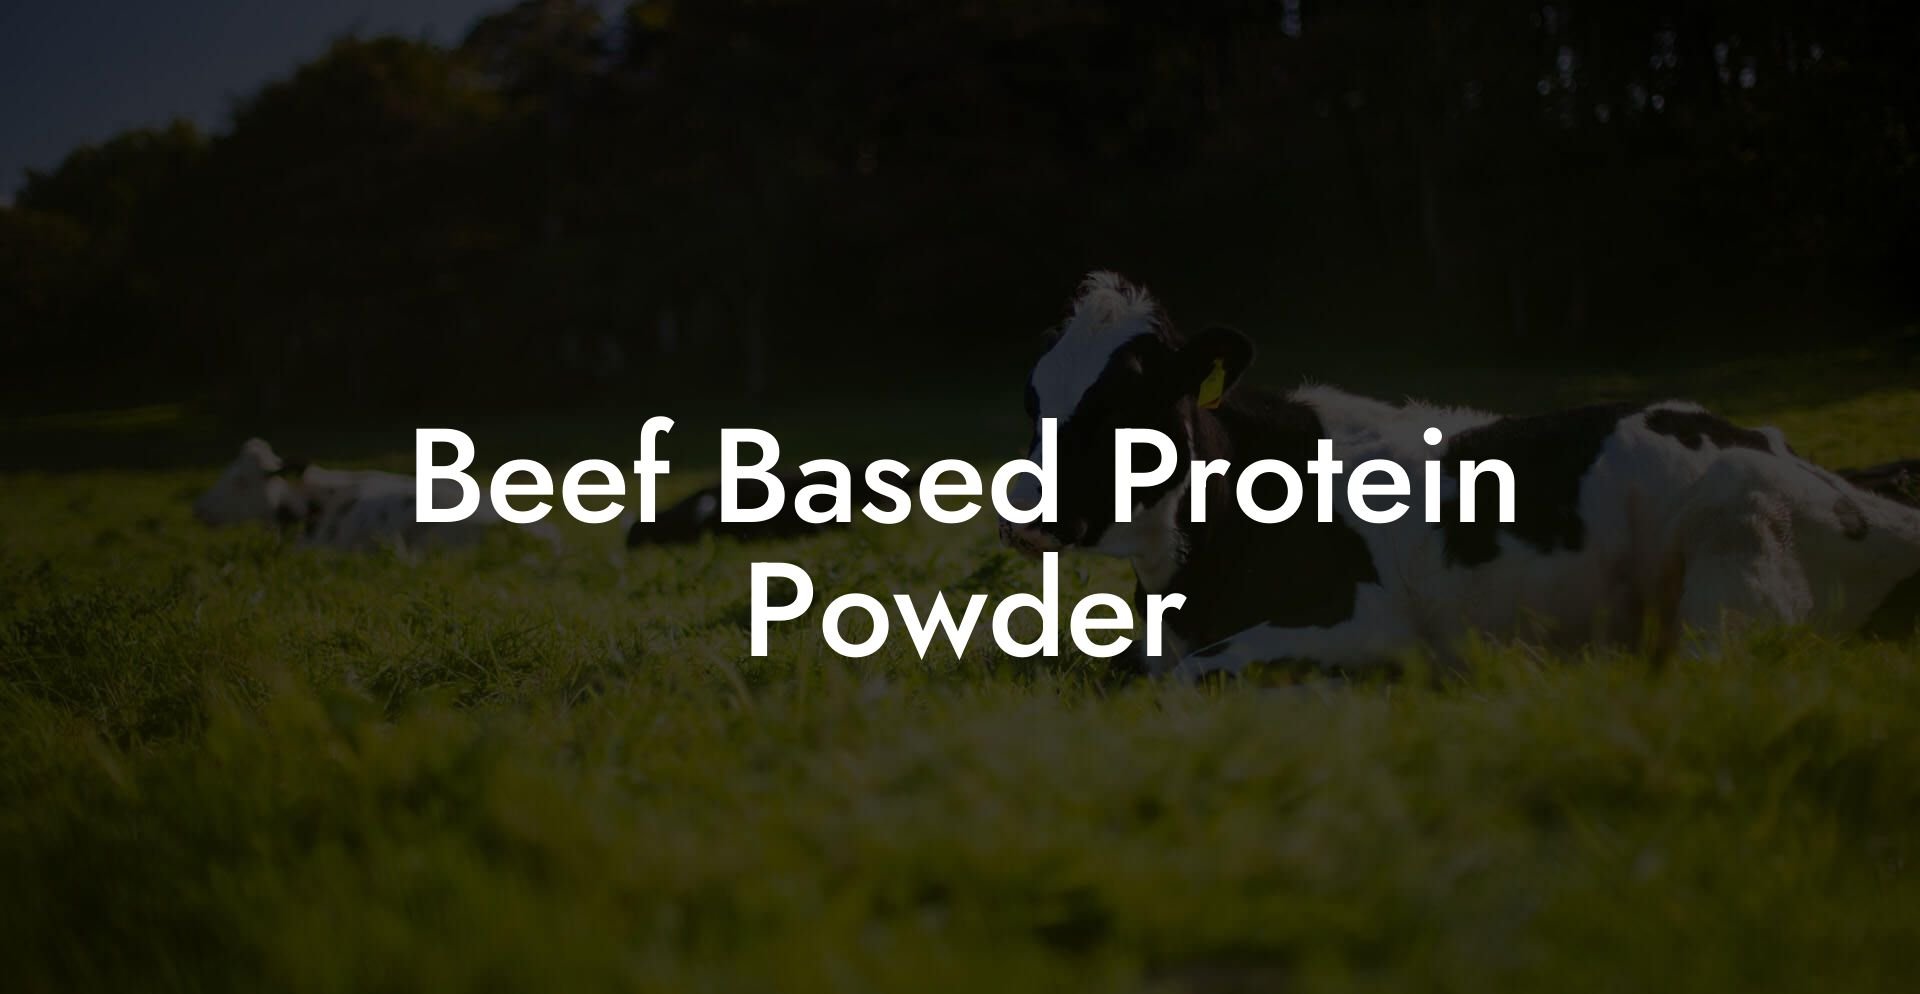 Beef Based Protein Powder